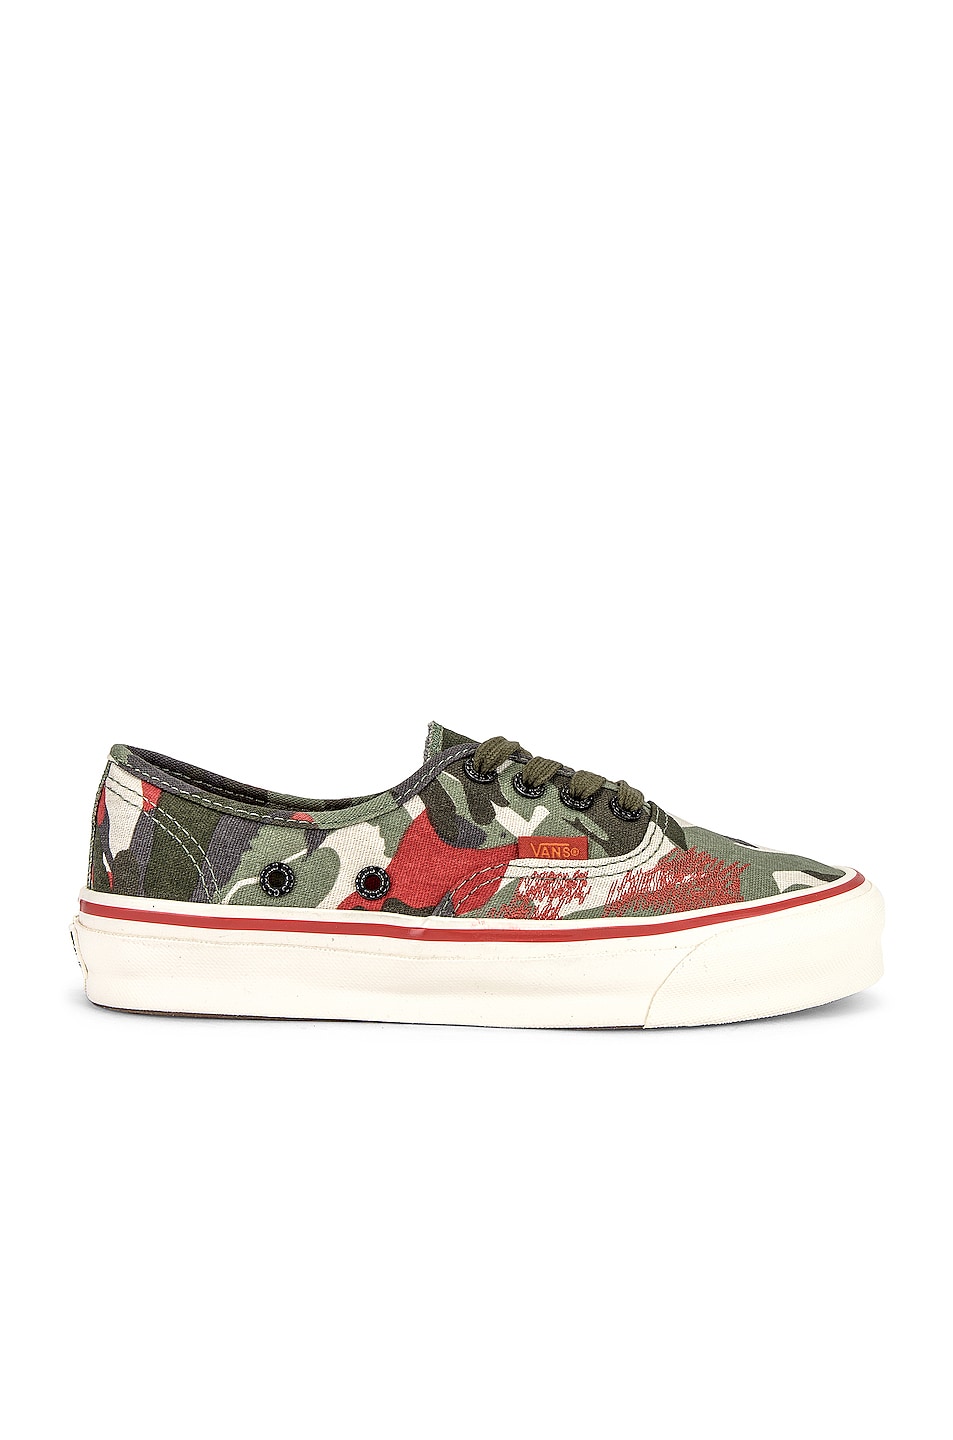 Image 1 of Vans Vault Nigel Cabourn OG Authentic LX in Army Green Camo